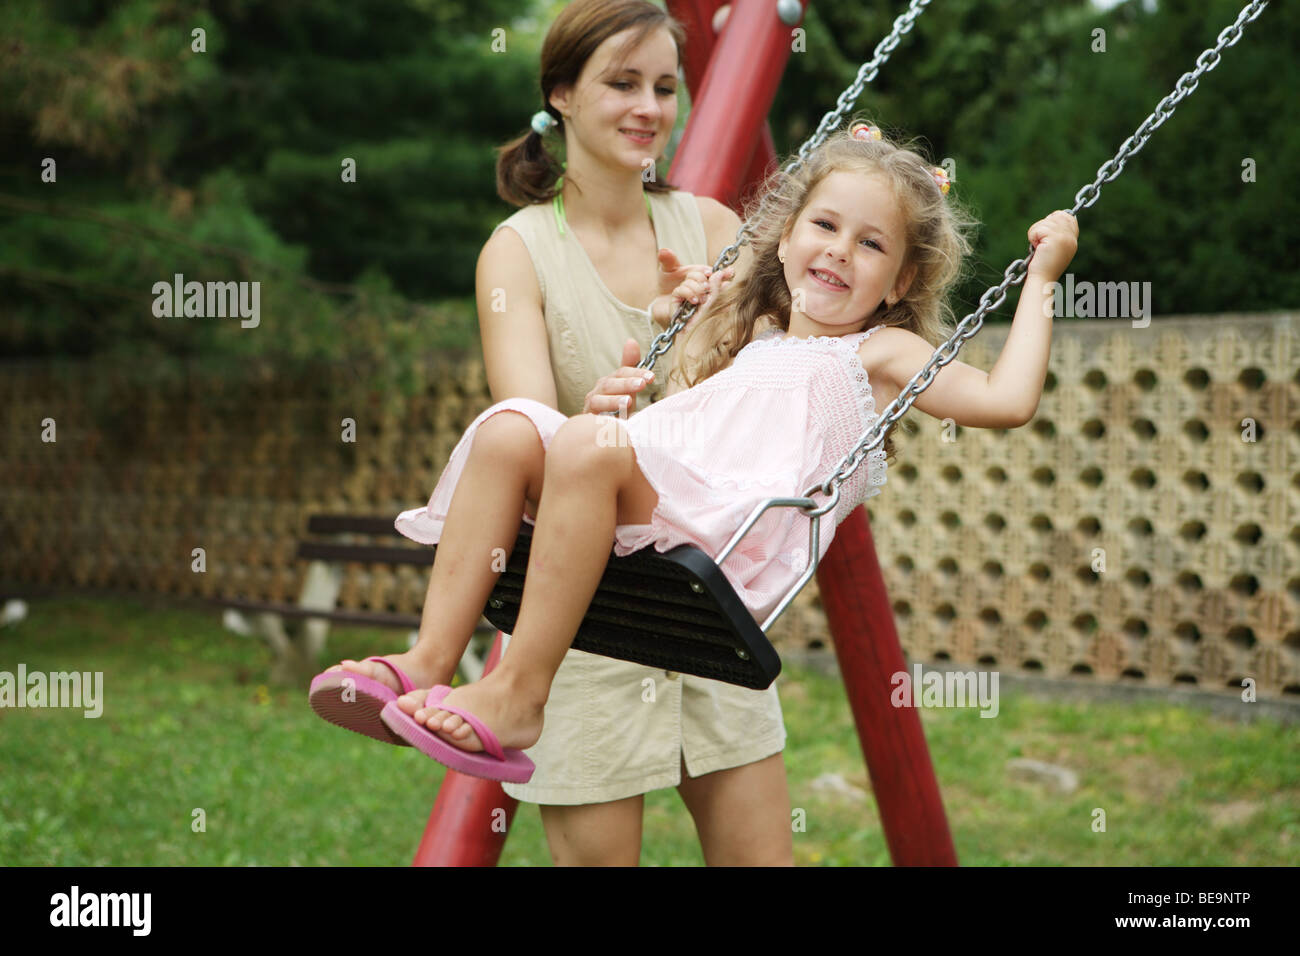 Mother and daughter playing in playground. Child is swinging on swing. Stock Photo